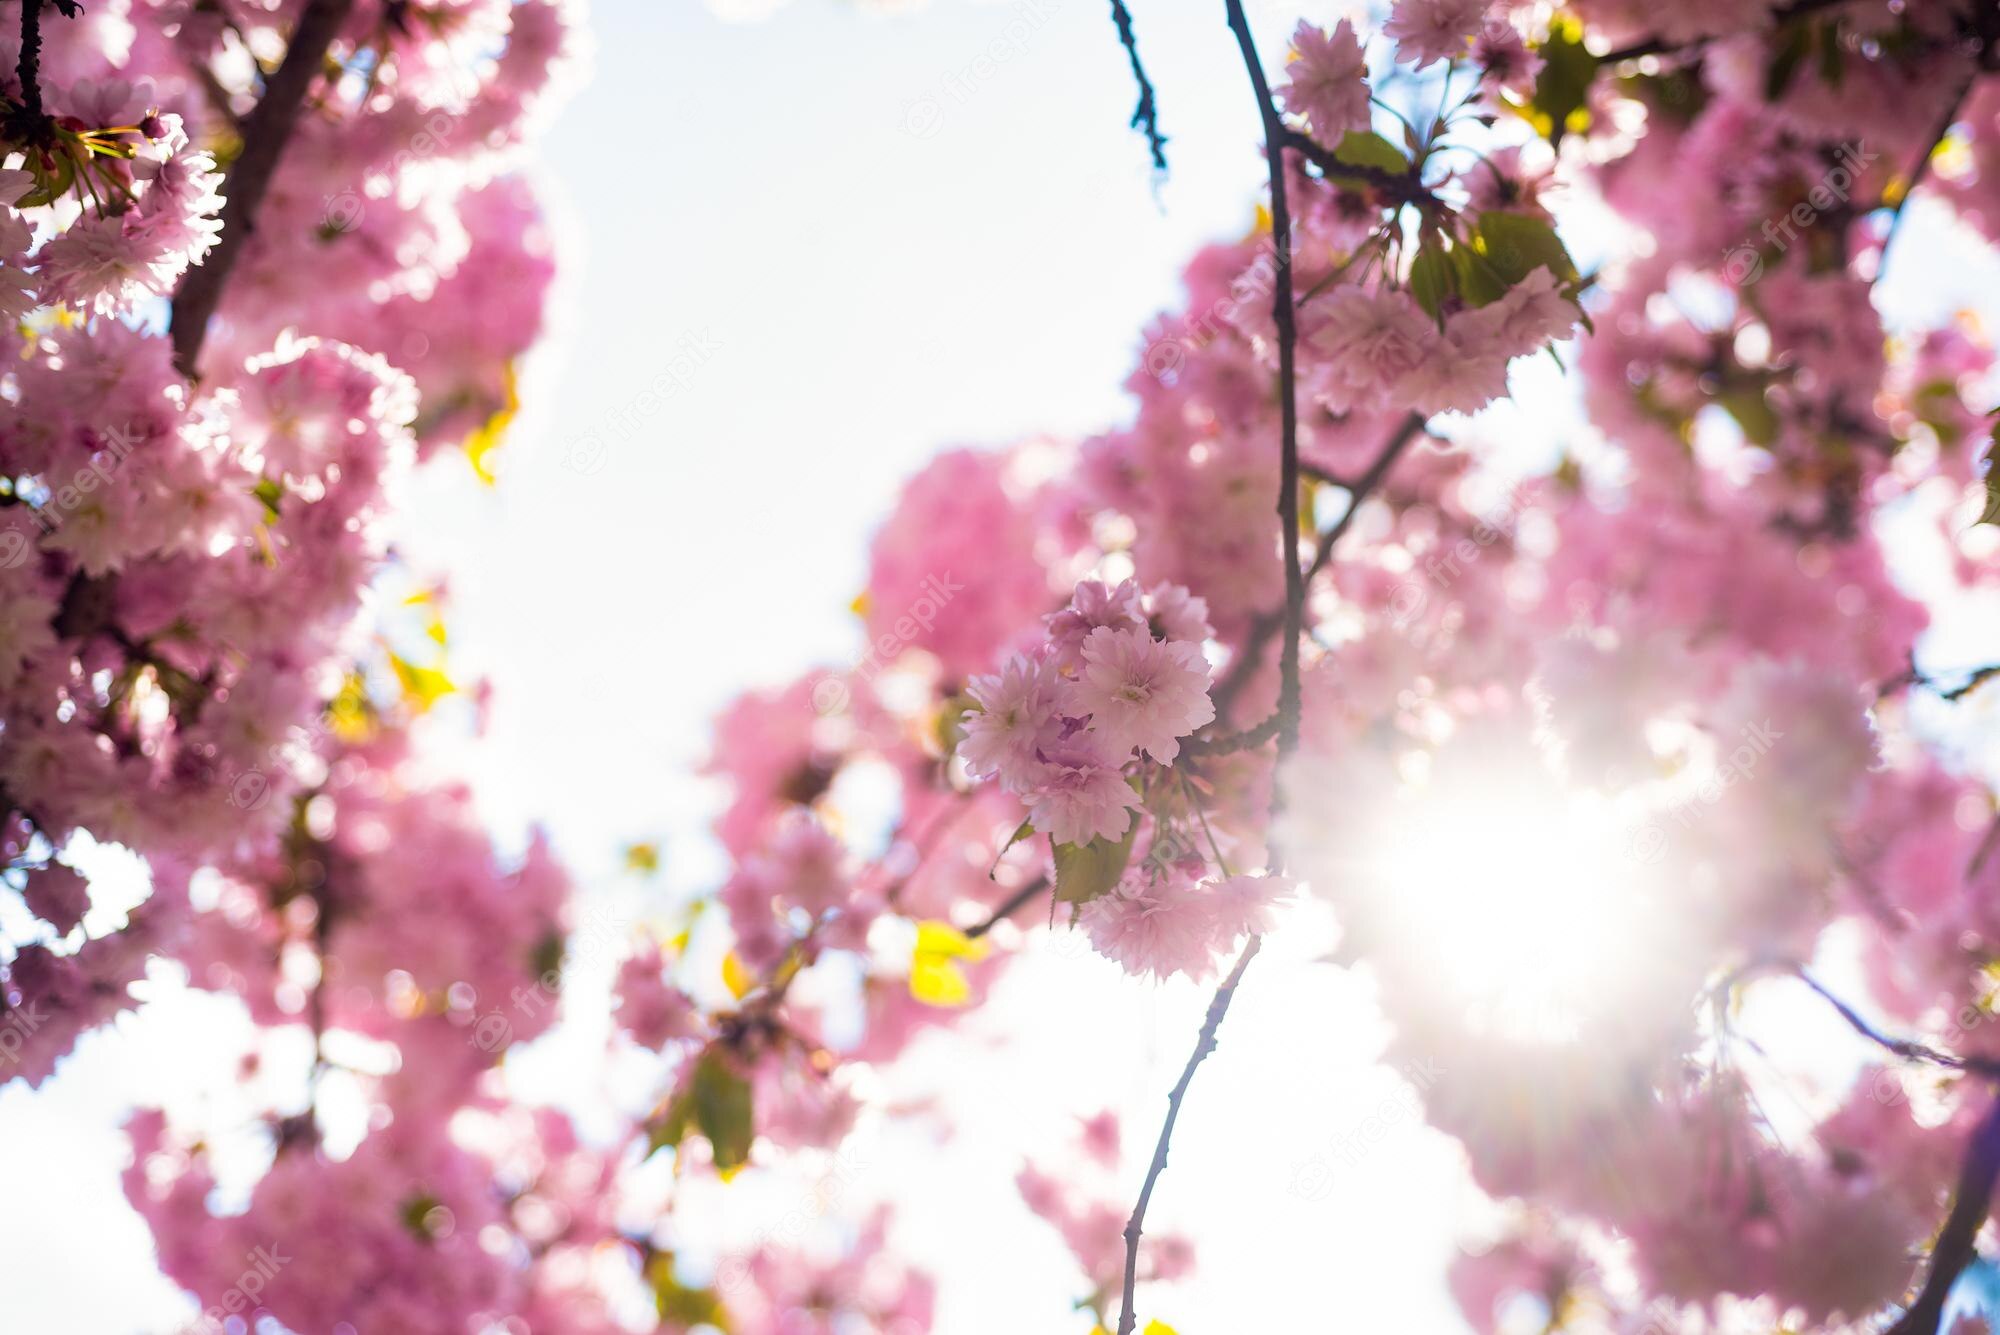 Premium Photo. Pink flowers of blooming japanese cherry tree in spring sunny day